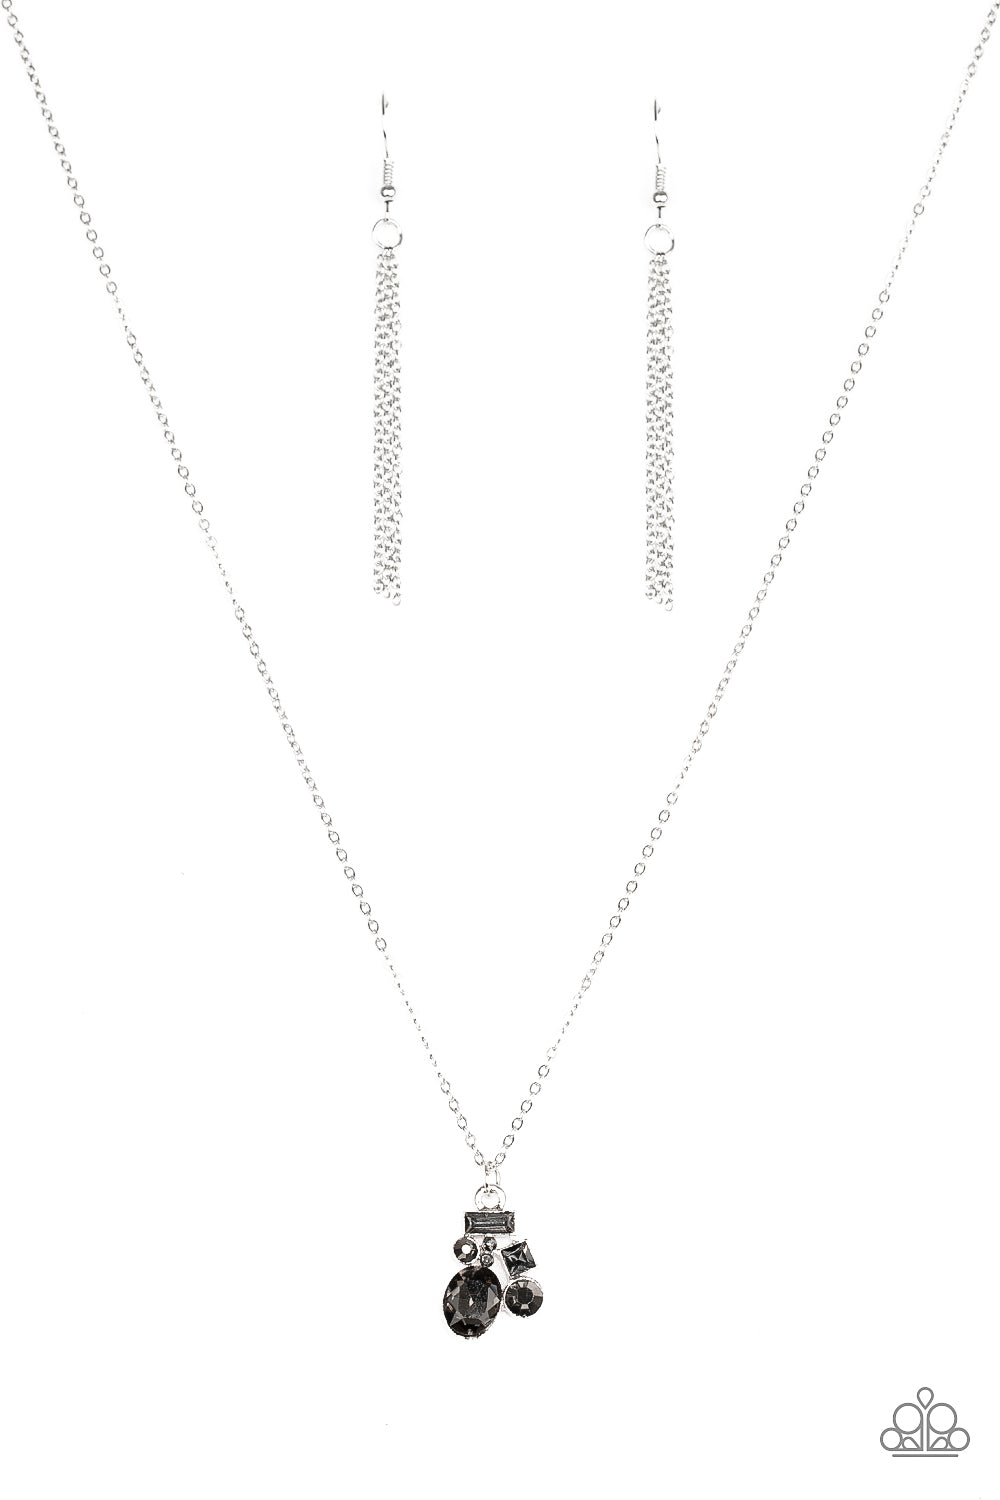 Varying in shape and size, smoky and hematite rhinestones coalesce into a sparkling pendant below the collar for a timeless look. Features an adjustable clasp closure.